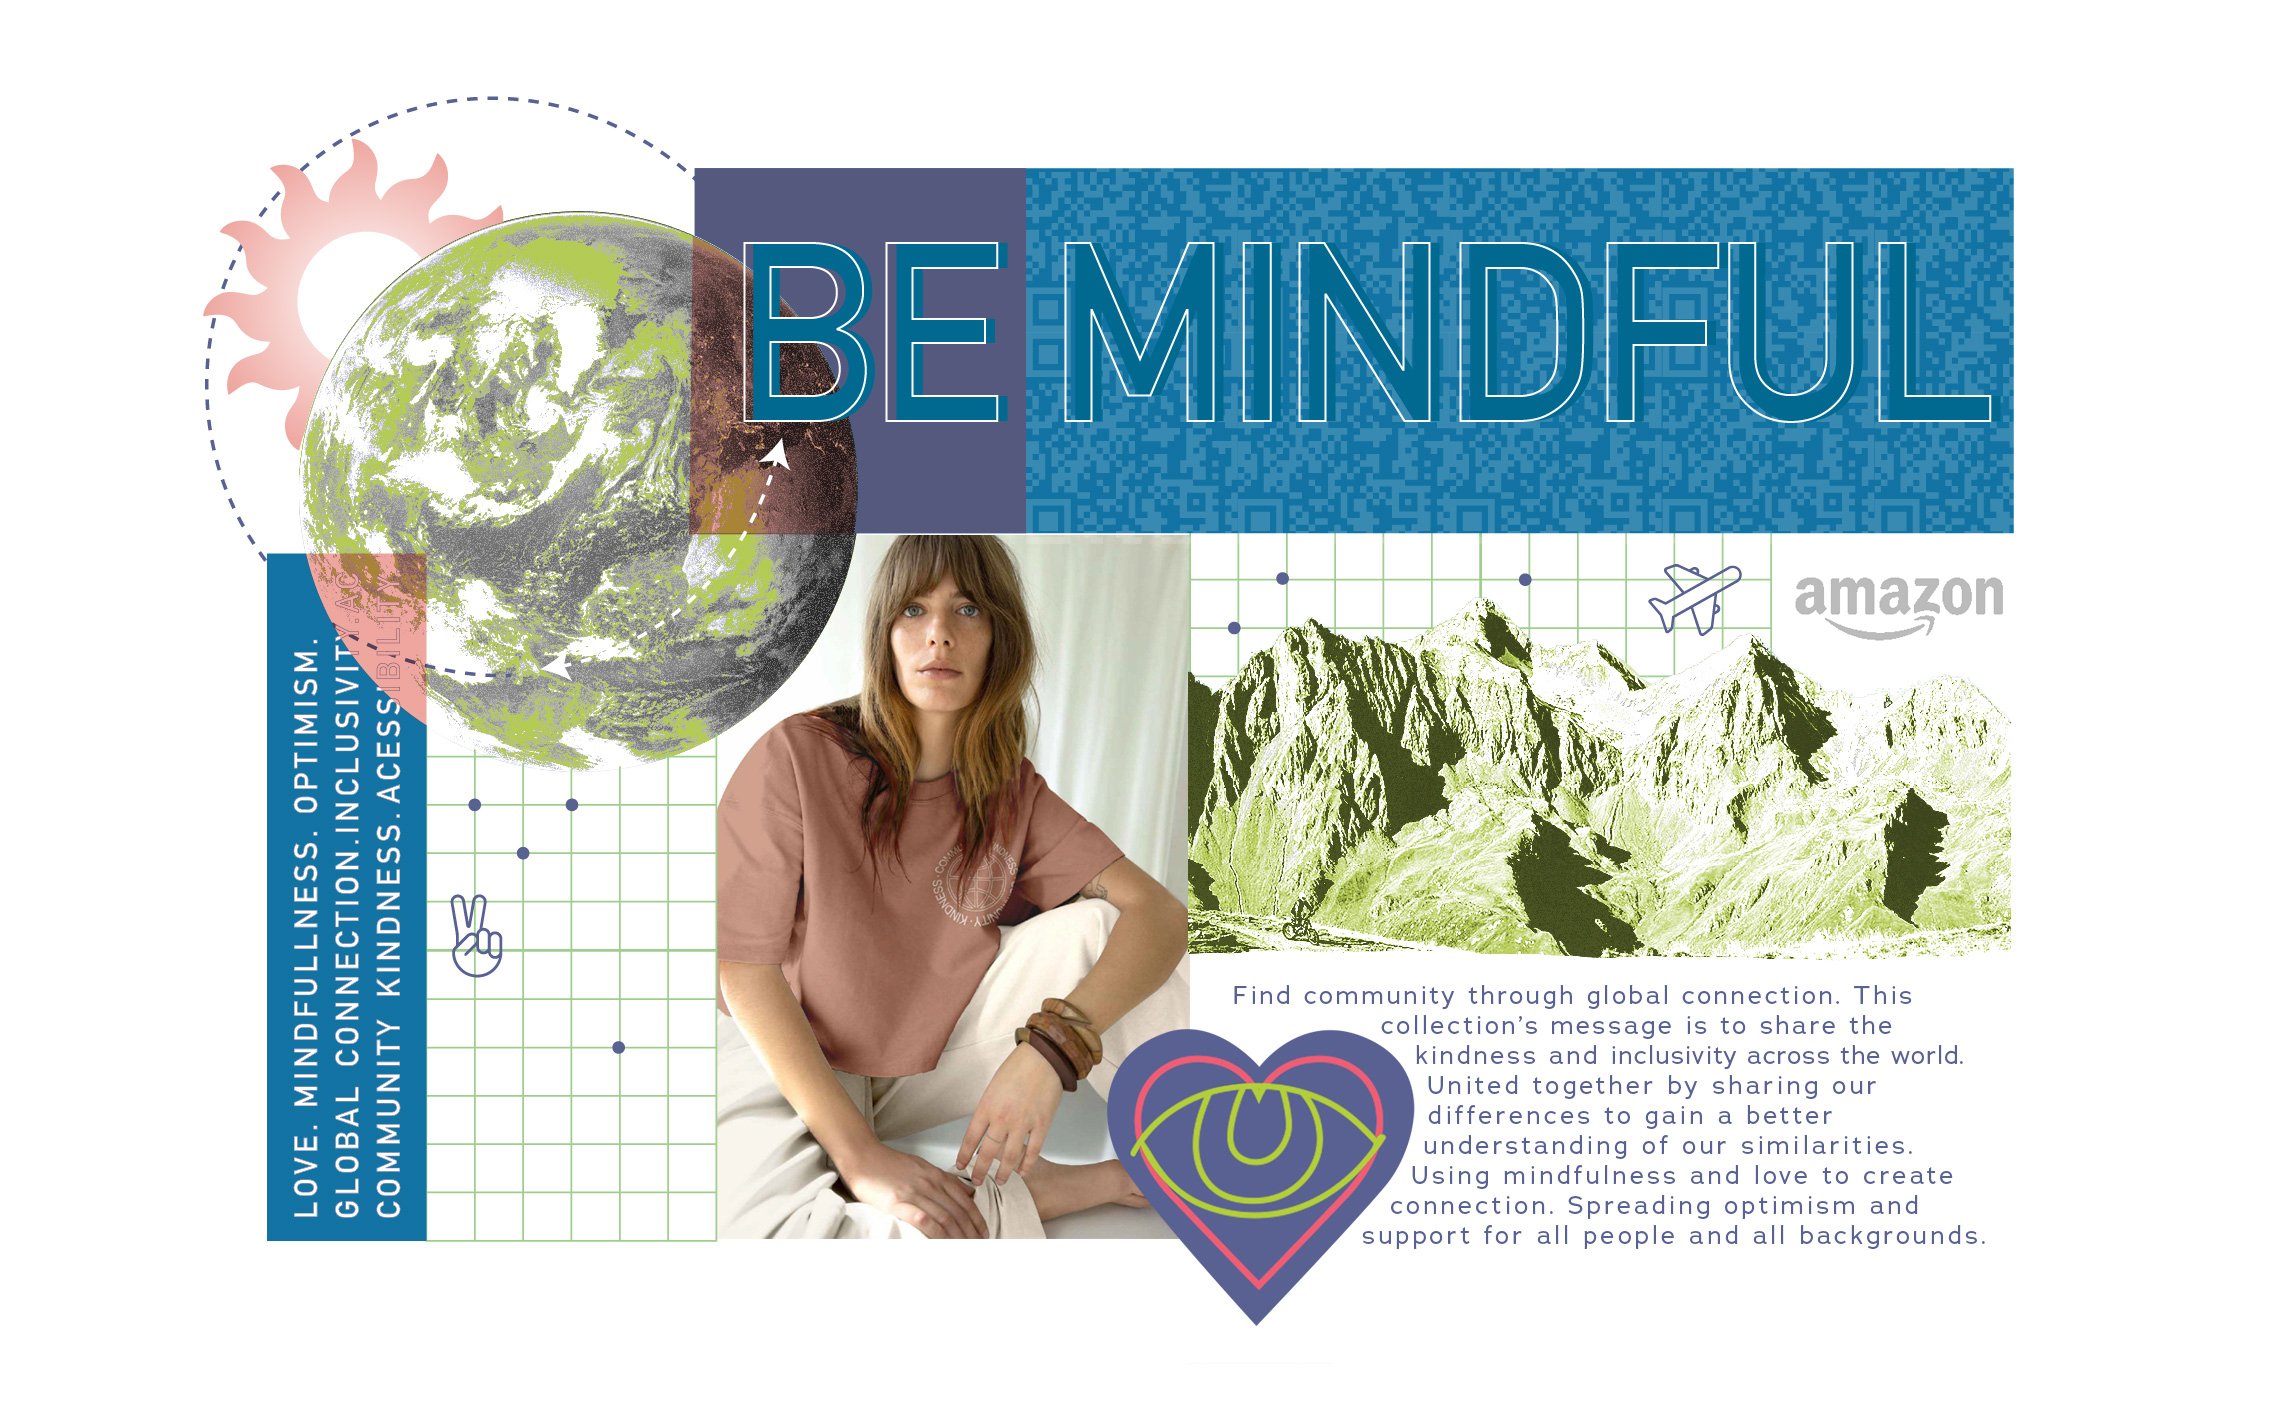 be-mindful-trend-collage-02.jpg